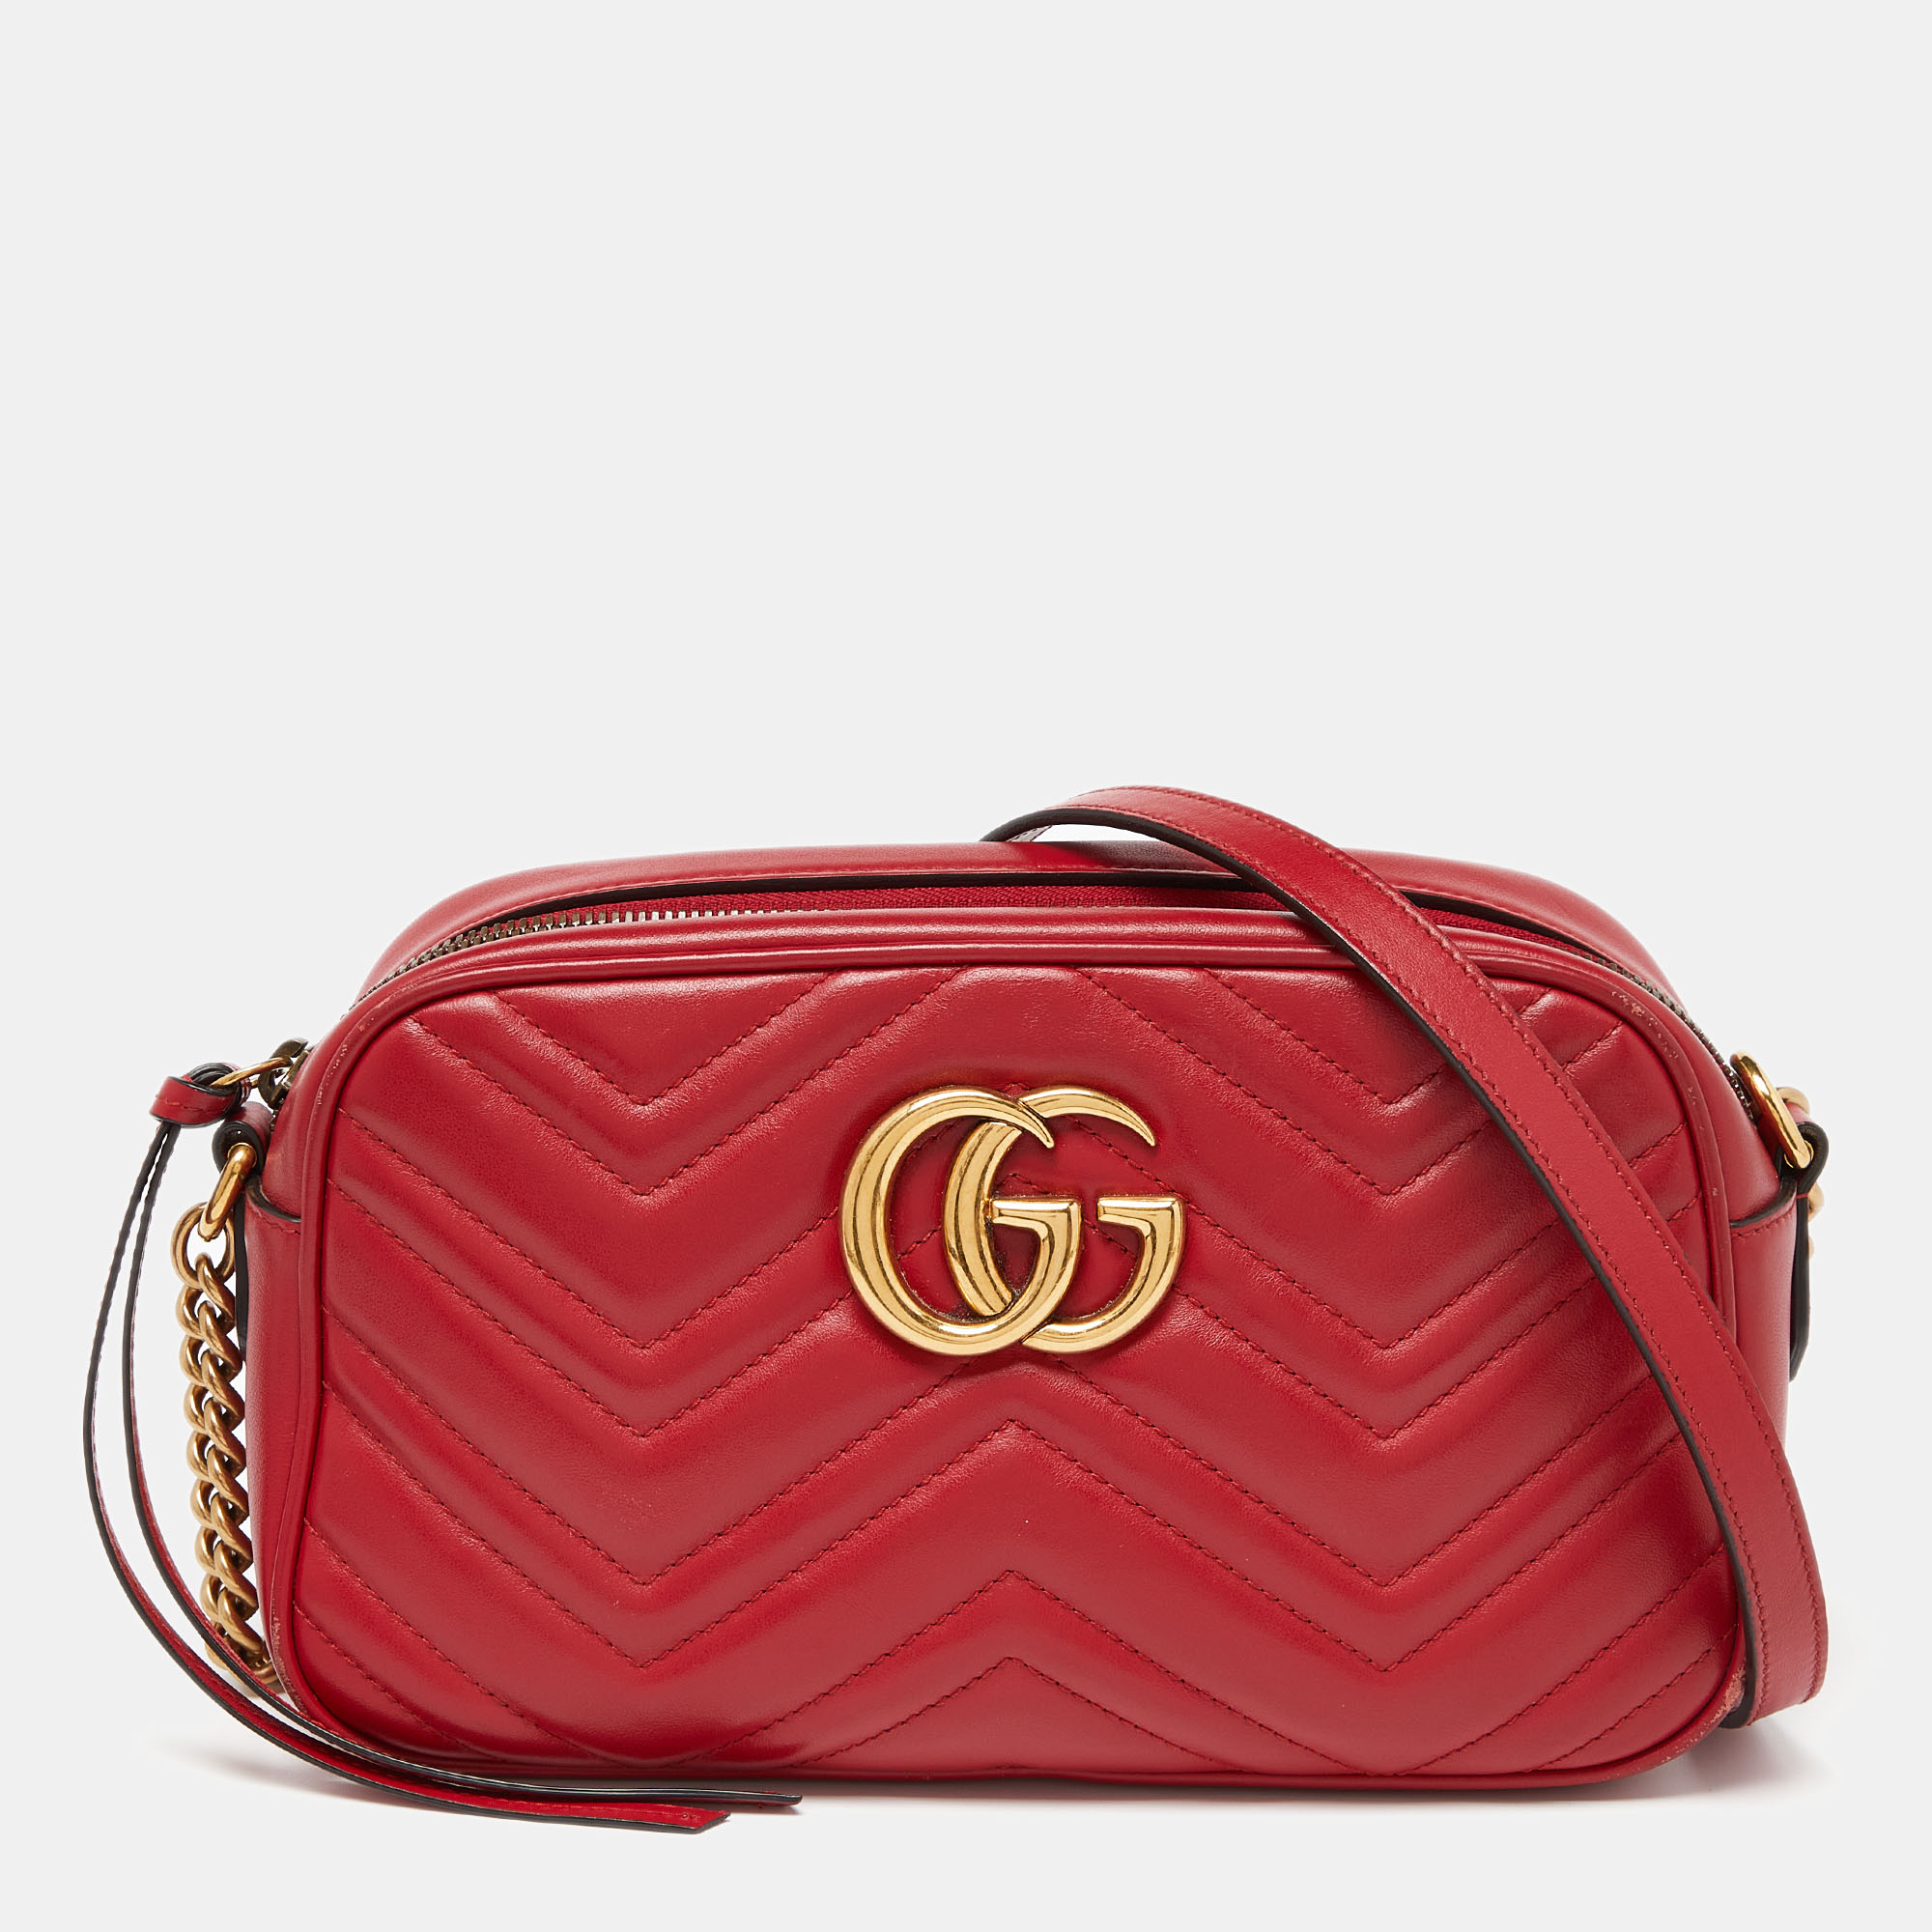 Pre-owned Gucci Red Matelassé Leather Small Gg Marmont Shoulder Bag